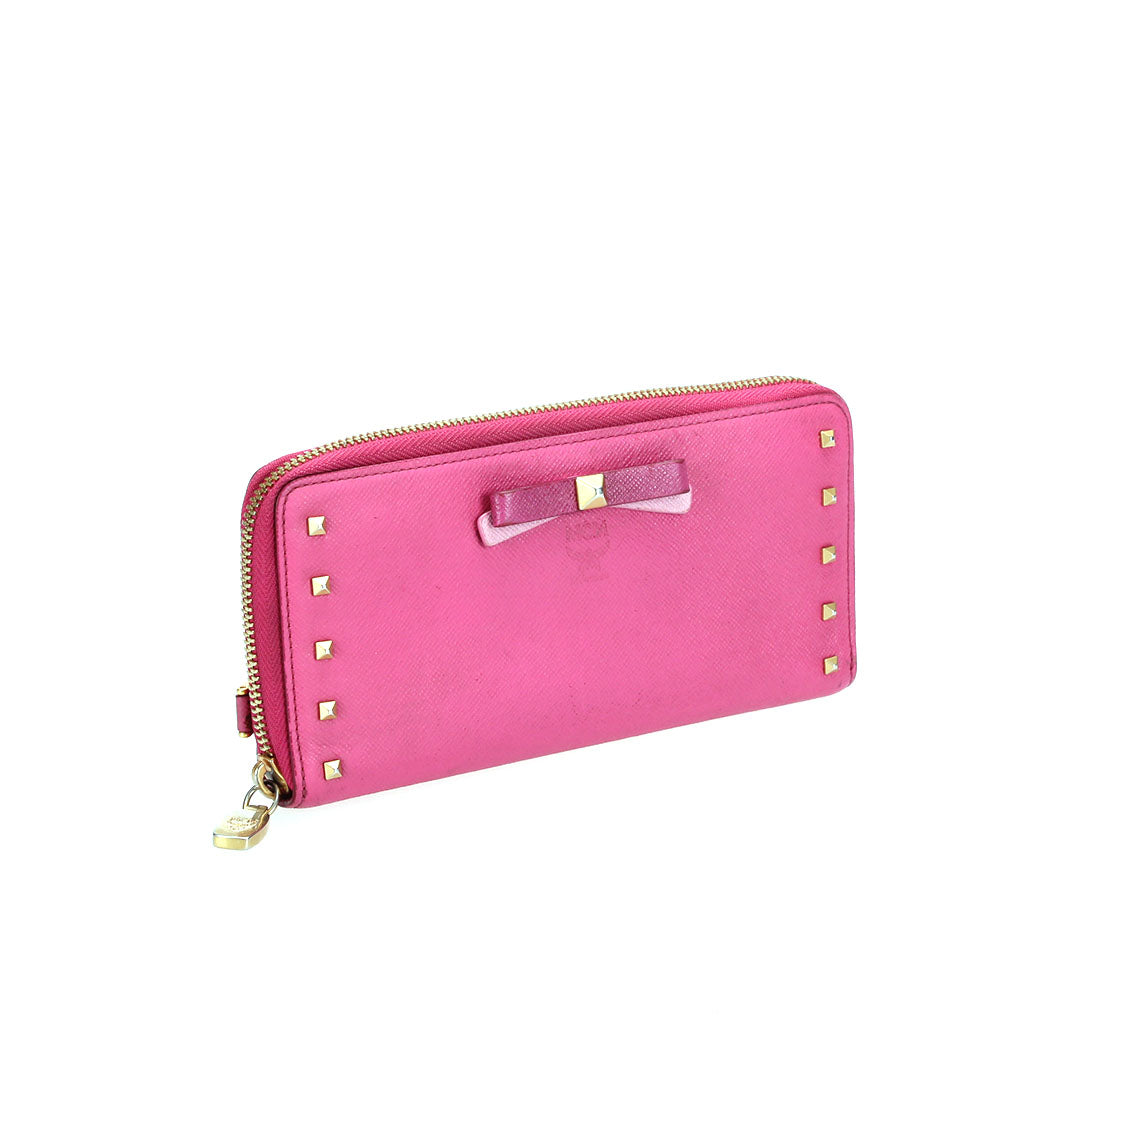 Studded Leather Long Wallet